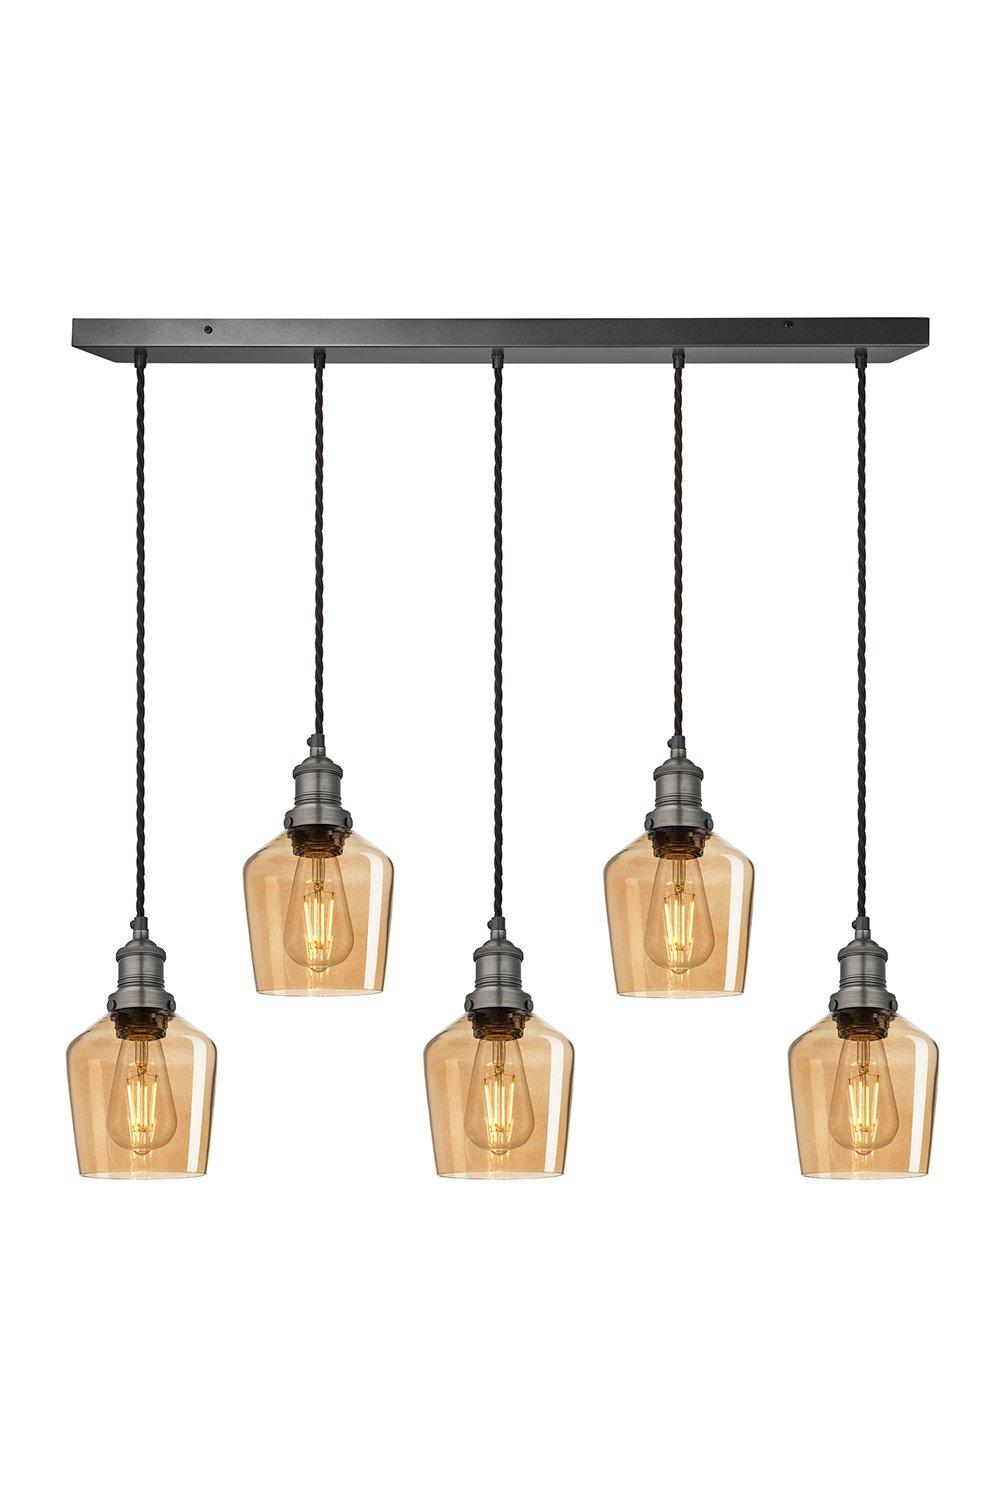 Brooklyn Tinted Glass Schoolhouse 5 Wire Cluster Lights, 5.5 inch, Amber, Pewter holder